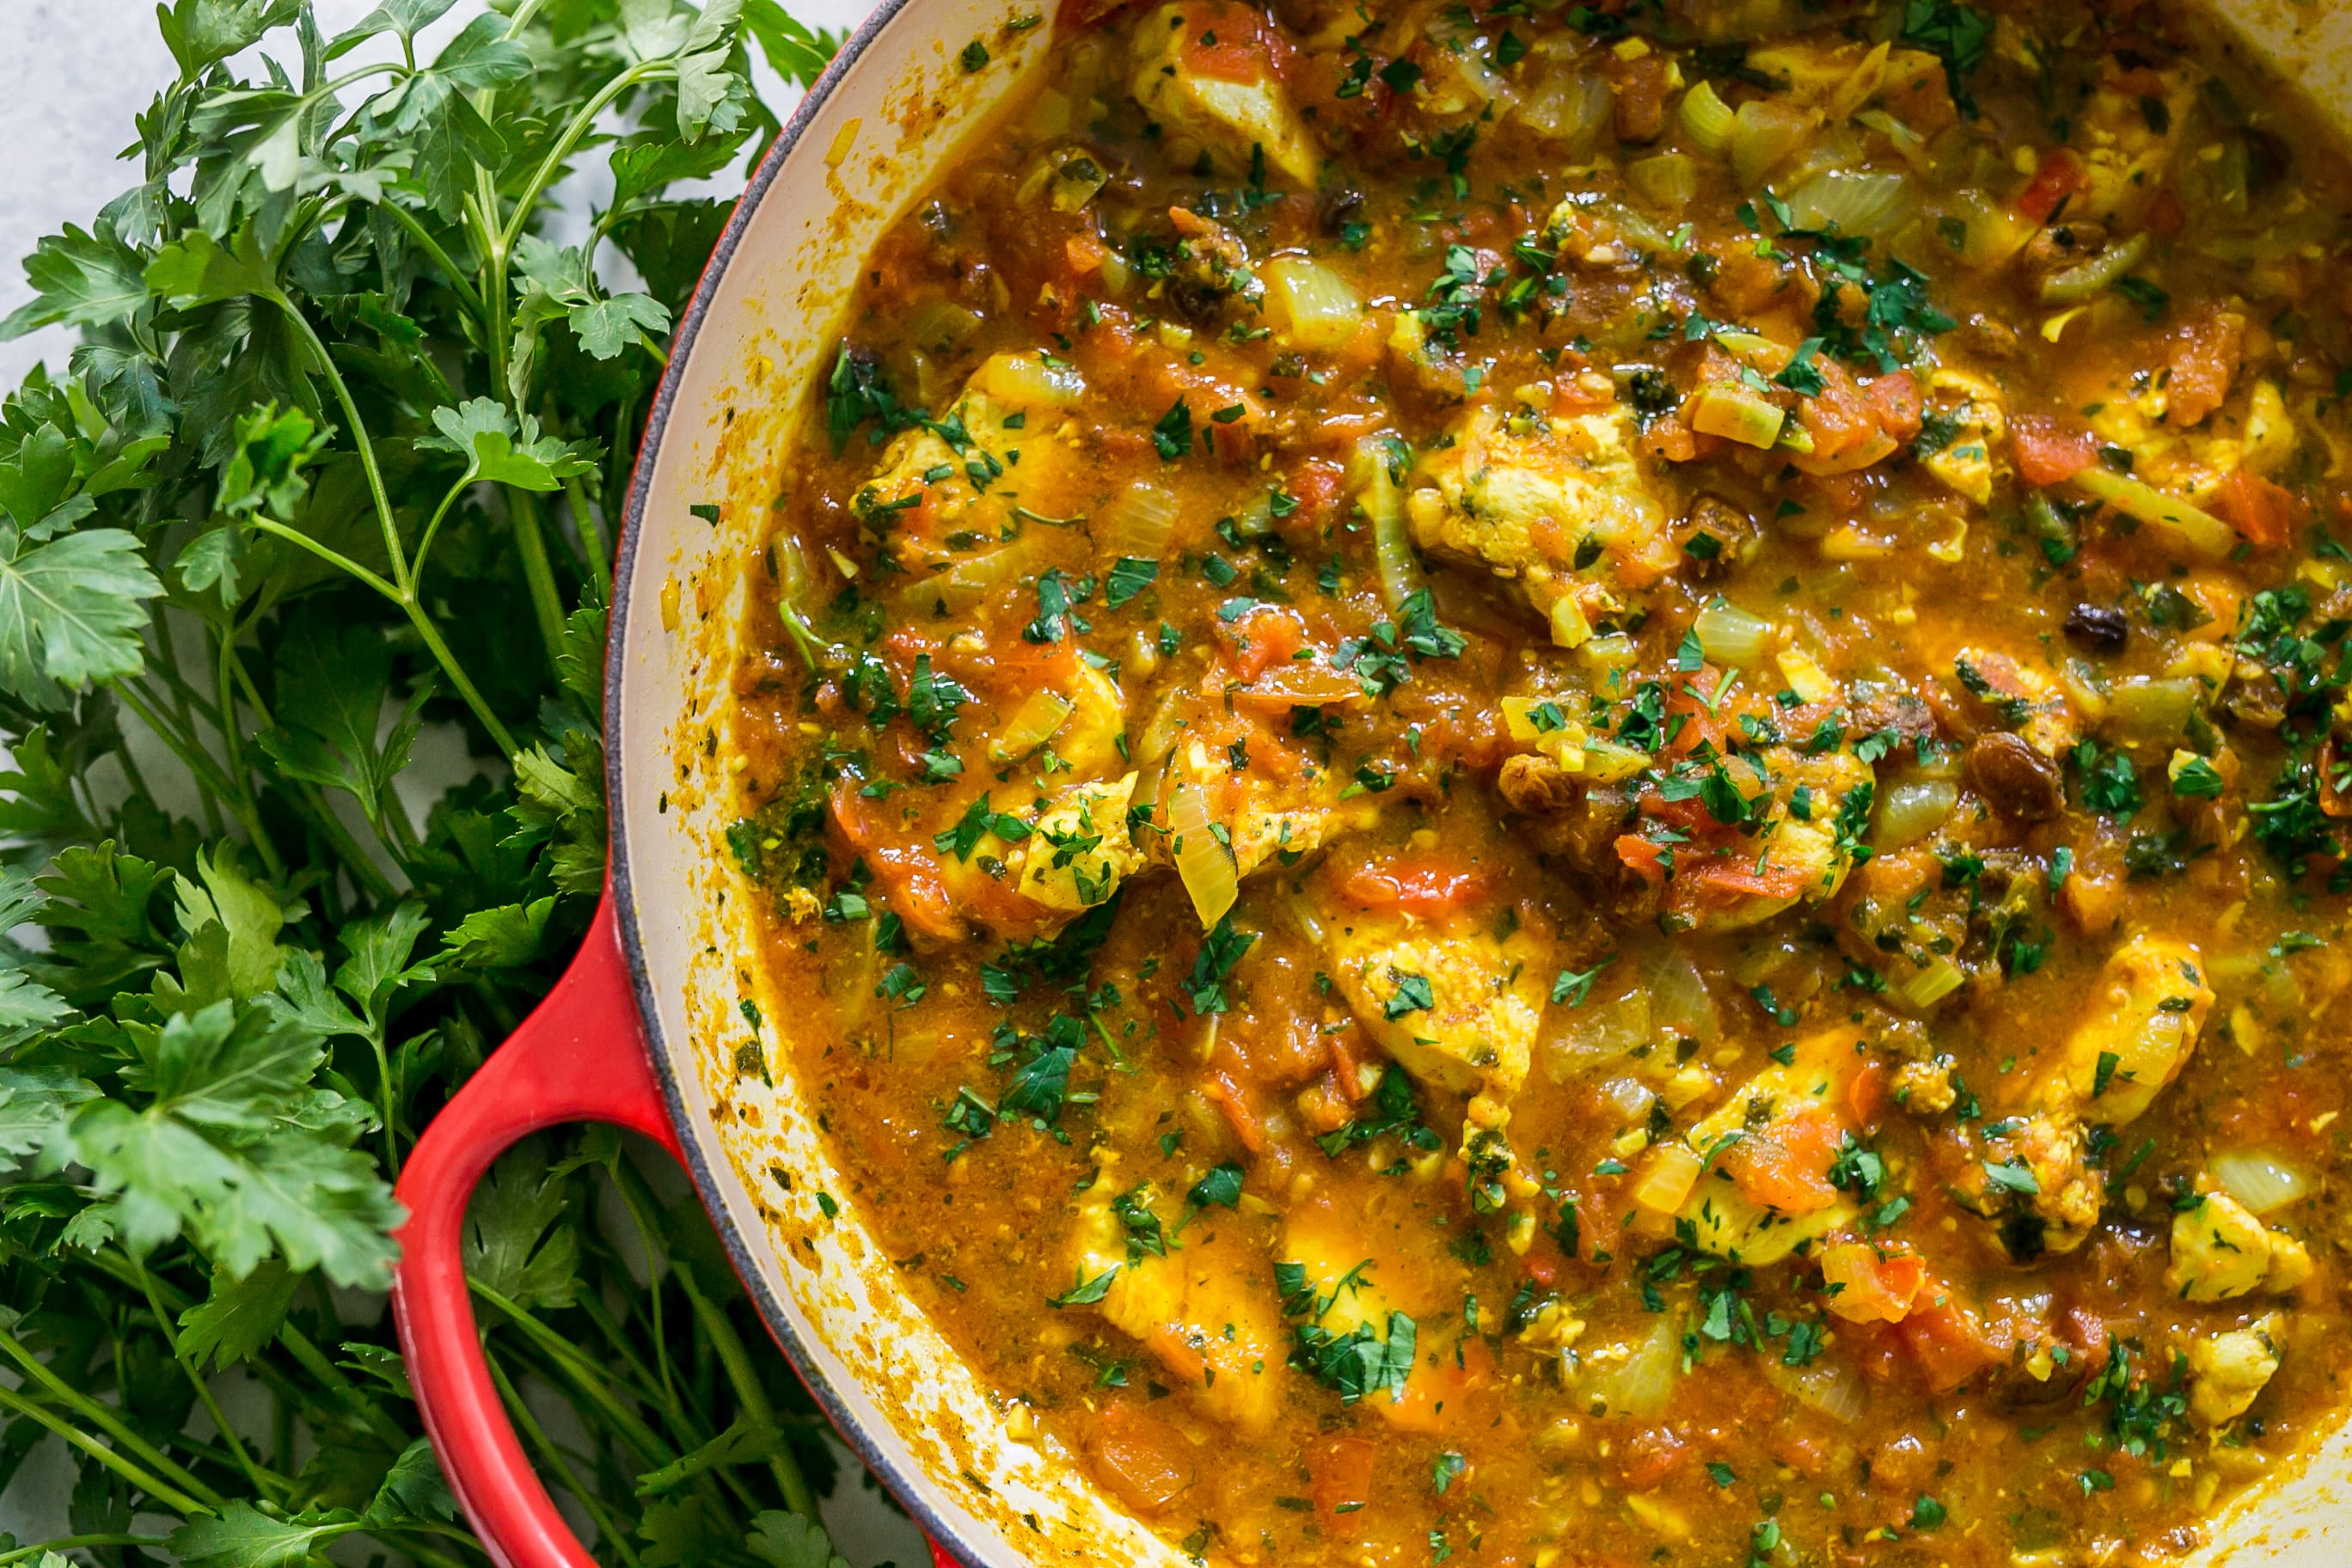 20 Specific Carbohydrate Diet Meals to Help Clients With Inflammatory Bowel Disease: Morrocan Chicken Stew